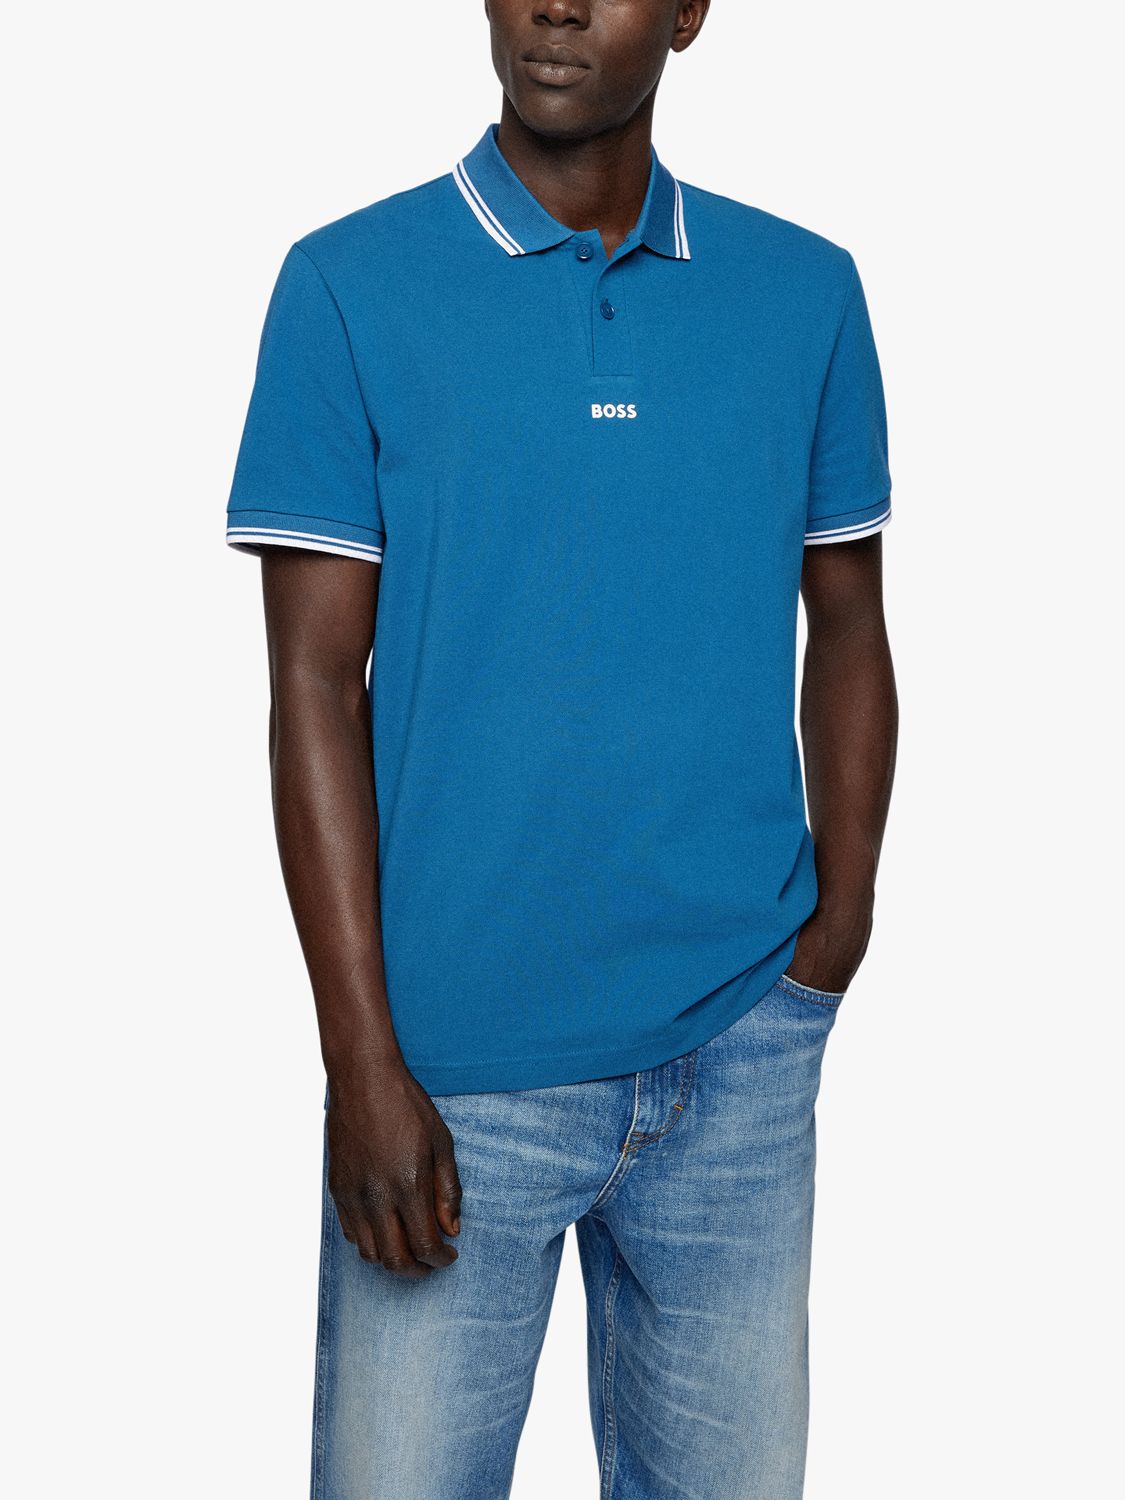 BOSS by HUGO BOSS Cotton Pchup Classic Polo Colour: Dark in Blue Mens T-shirts BOSS by HUGO BOSS T-shirts for Men White 